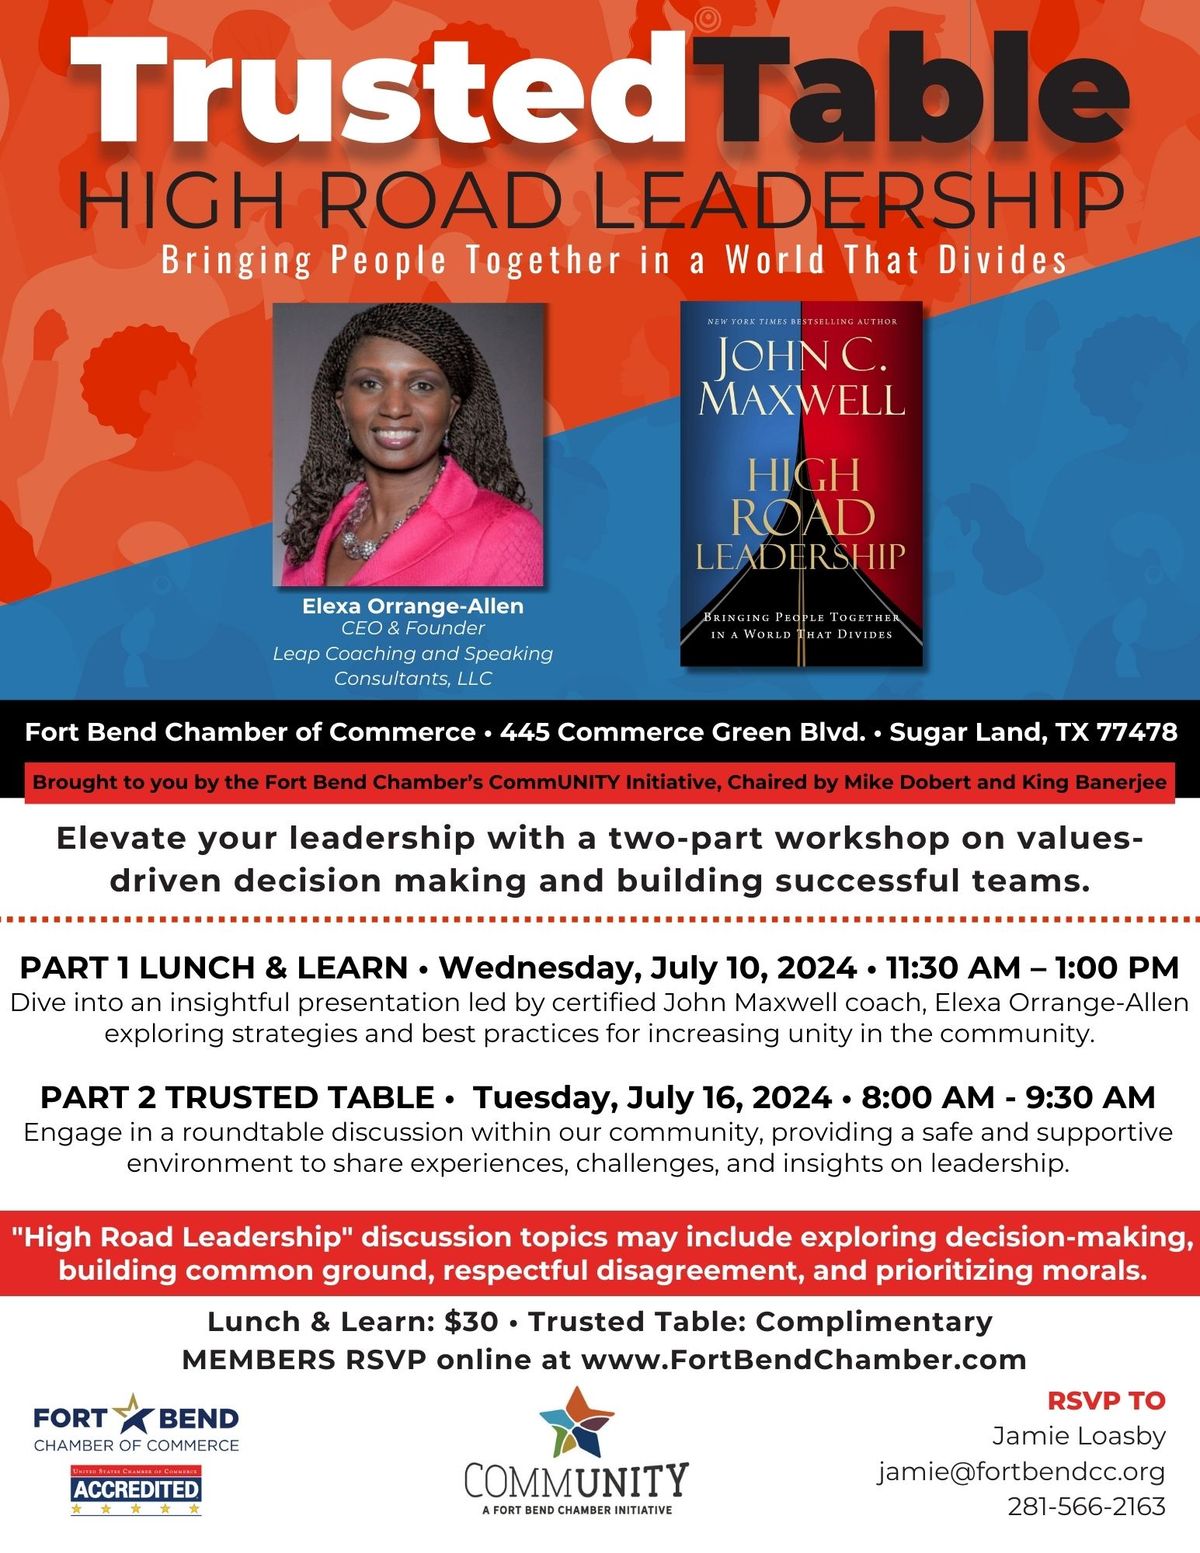 Part 2 - Lunch & Learn: High Road Leadership